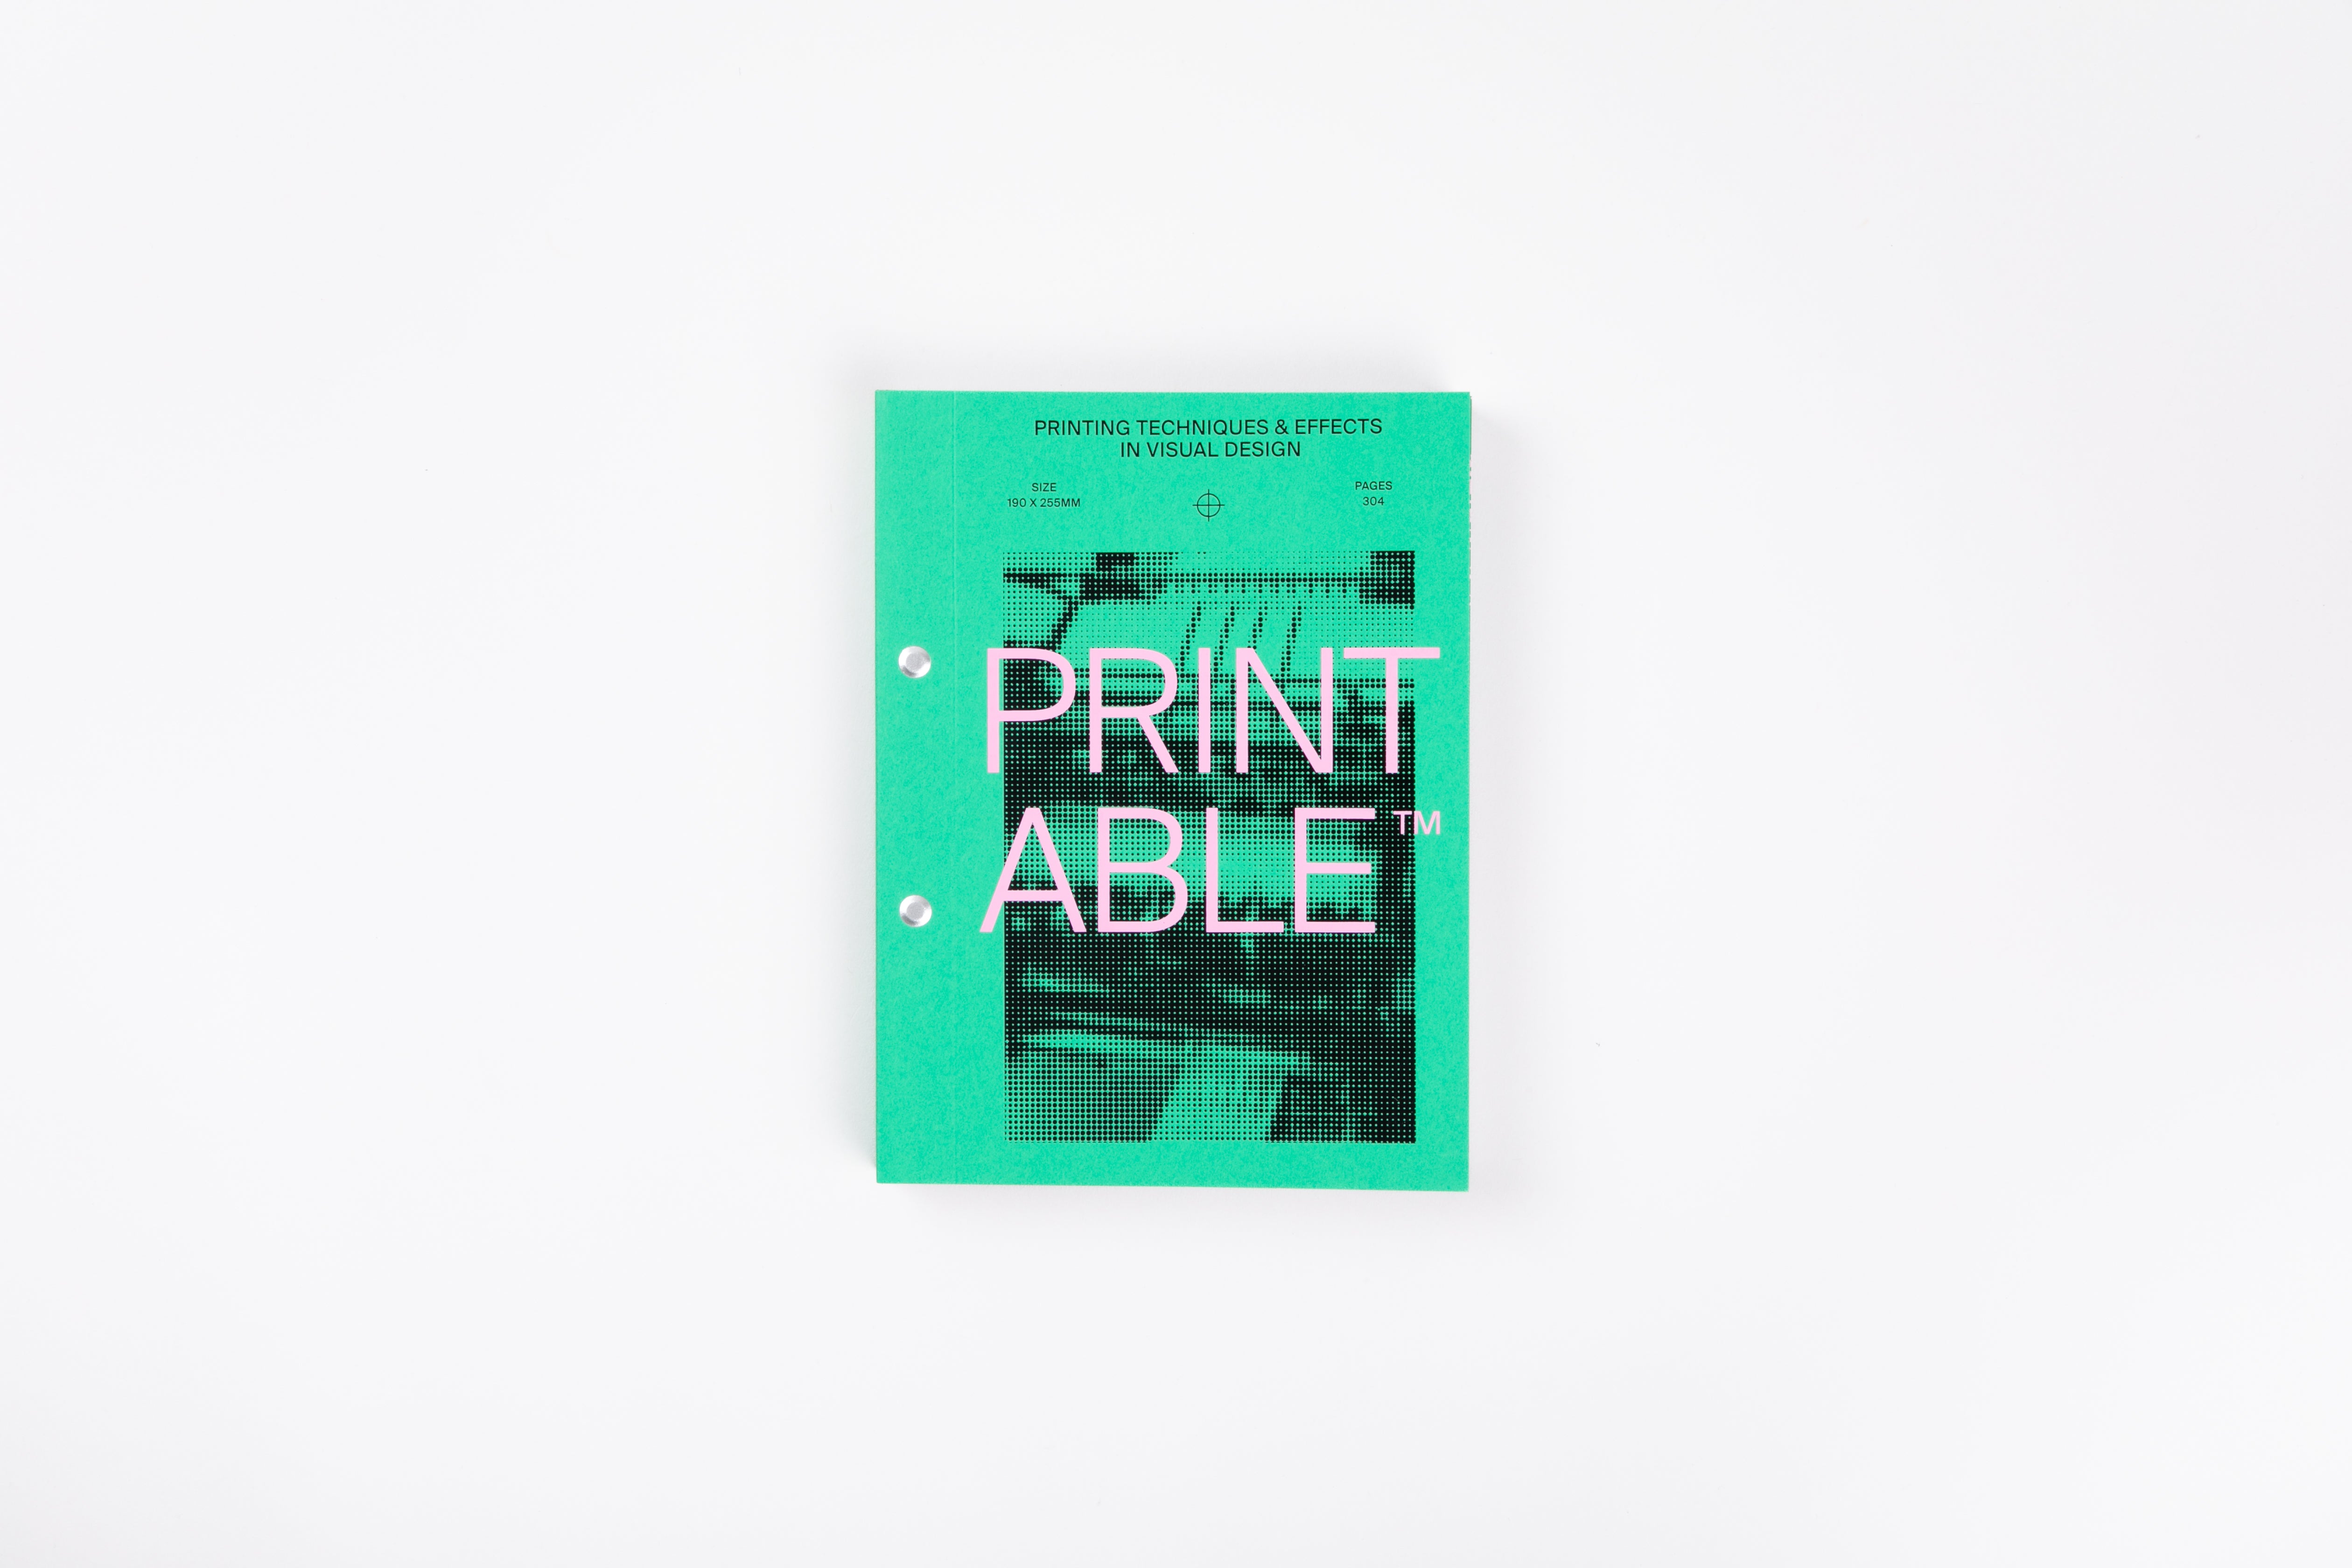 Printable:　and　Poetics　Effects　Printing　Visual　Design　–　Post　Techniques　in